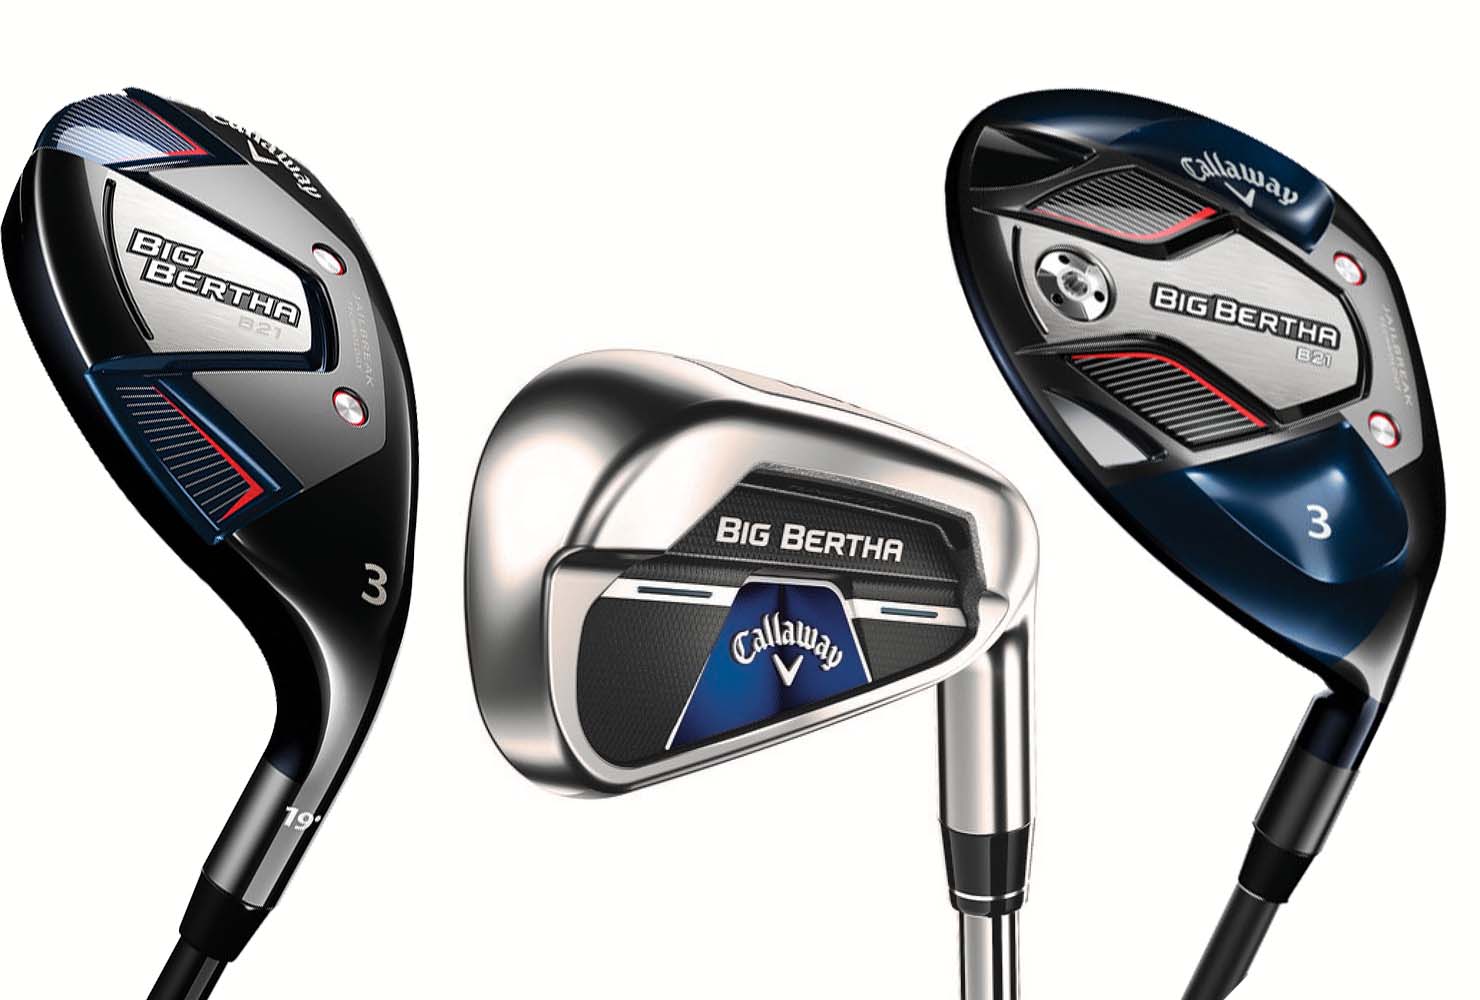 Callaway Releases B21 Irons, Hybrid and Fairway Woods - The